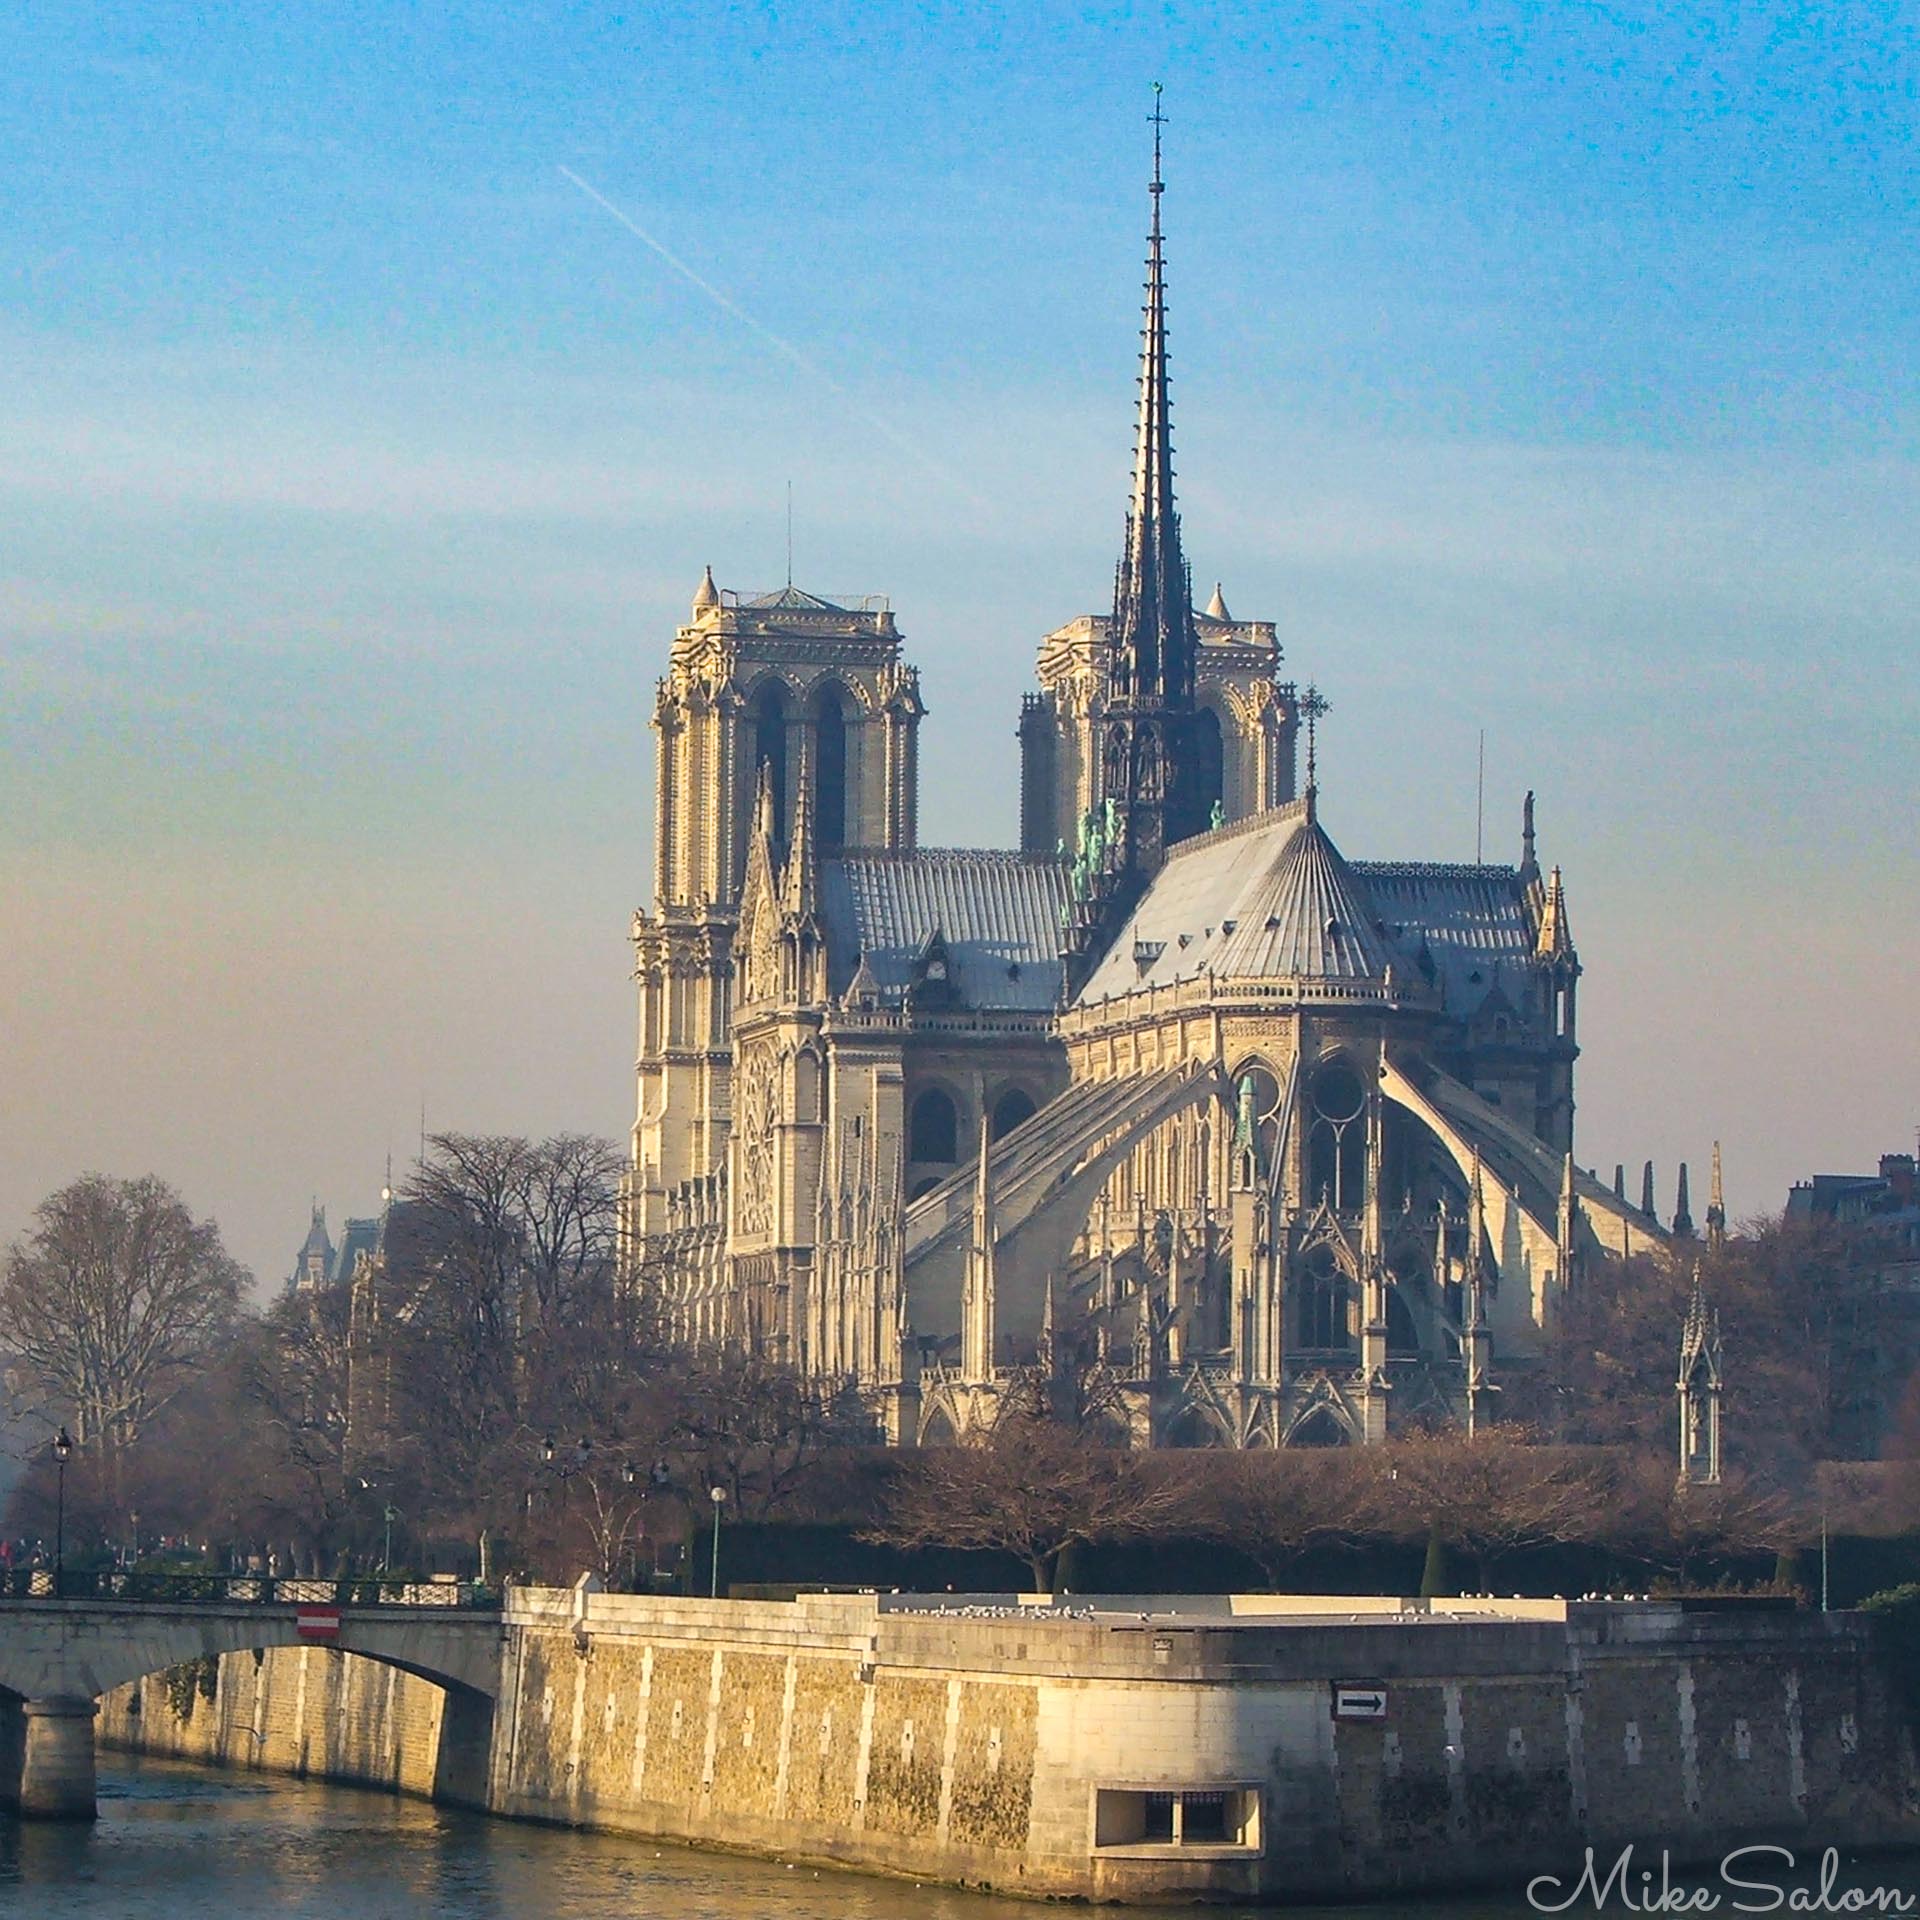 Notre Dame before the fire : Horrified by the fire of 2019, I resurrected this old image of mine, taken on Christmas Day 2007. (DSCF5040.jpg)<br>Camera: FinePix S5500